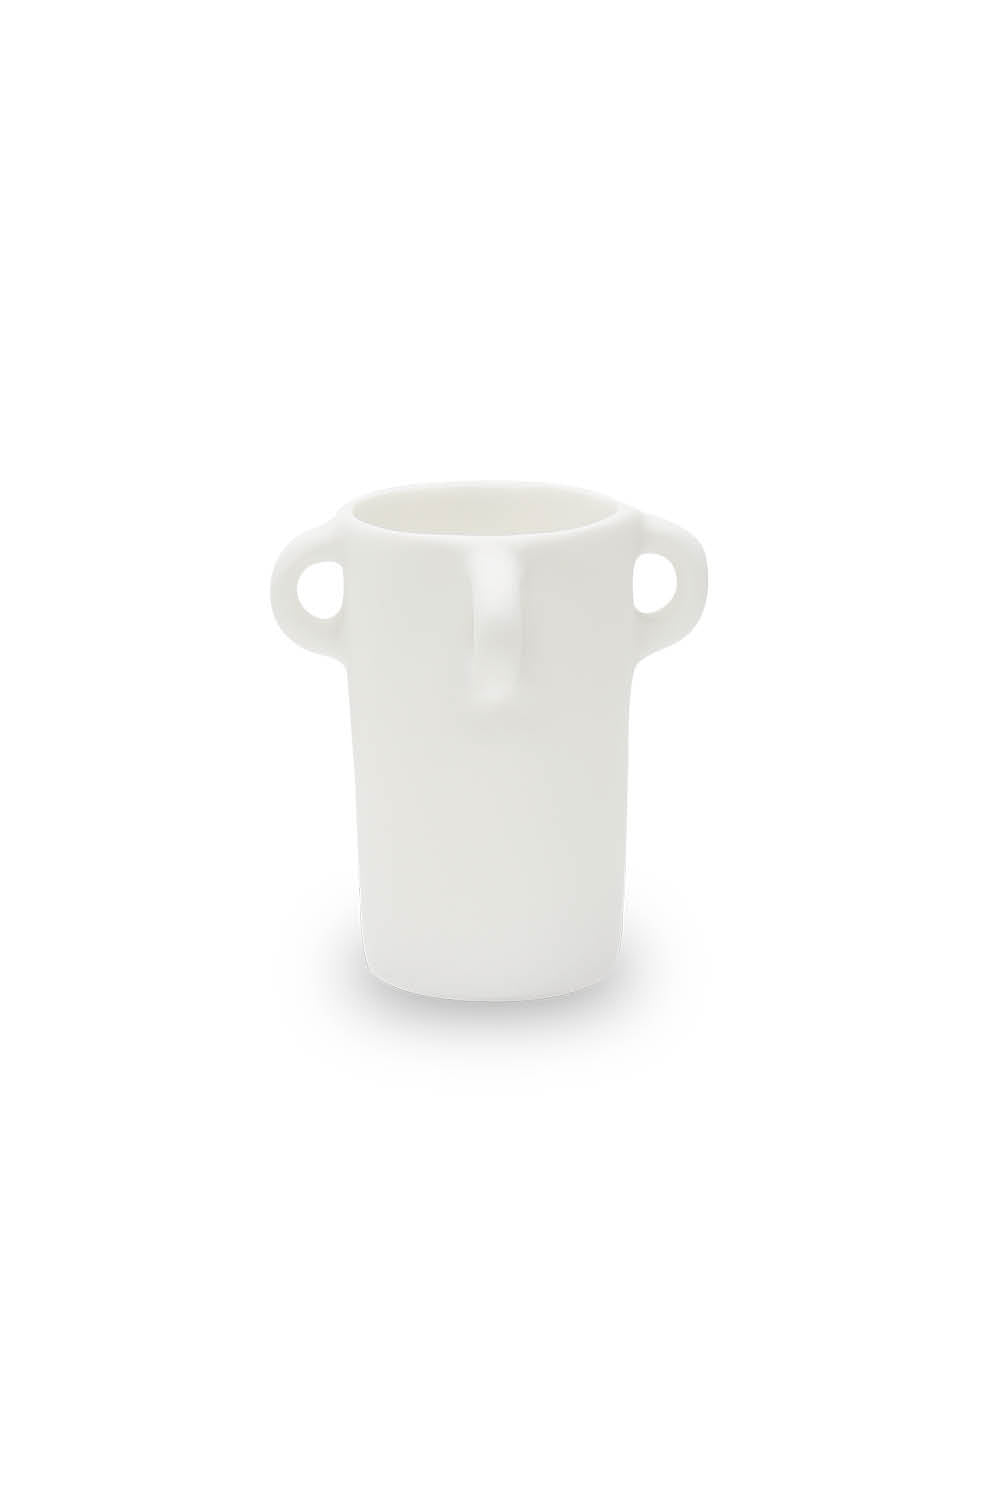 LOOPY Small Vase in White